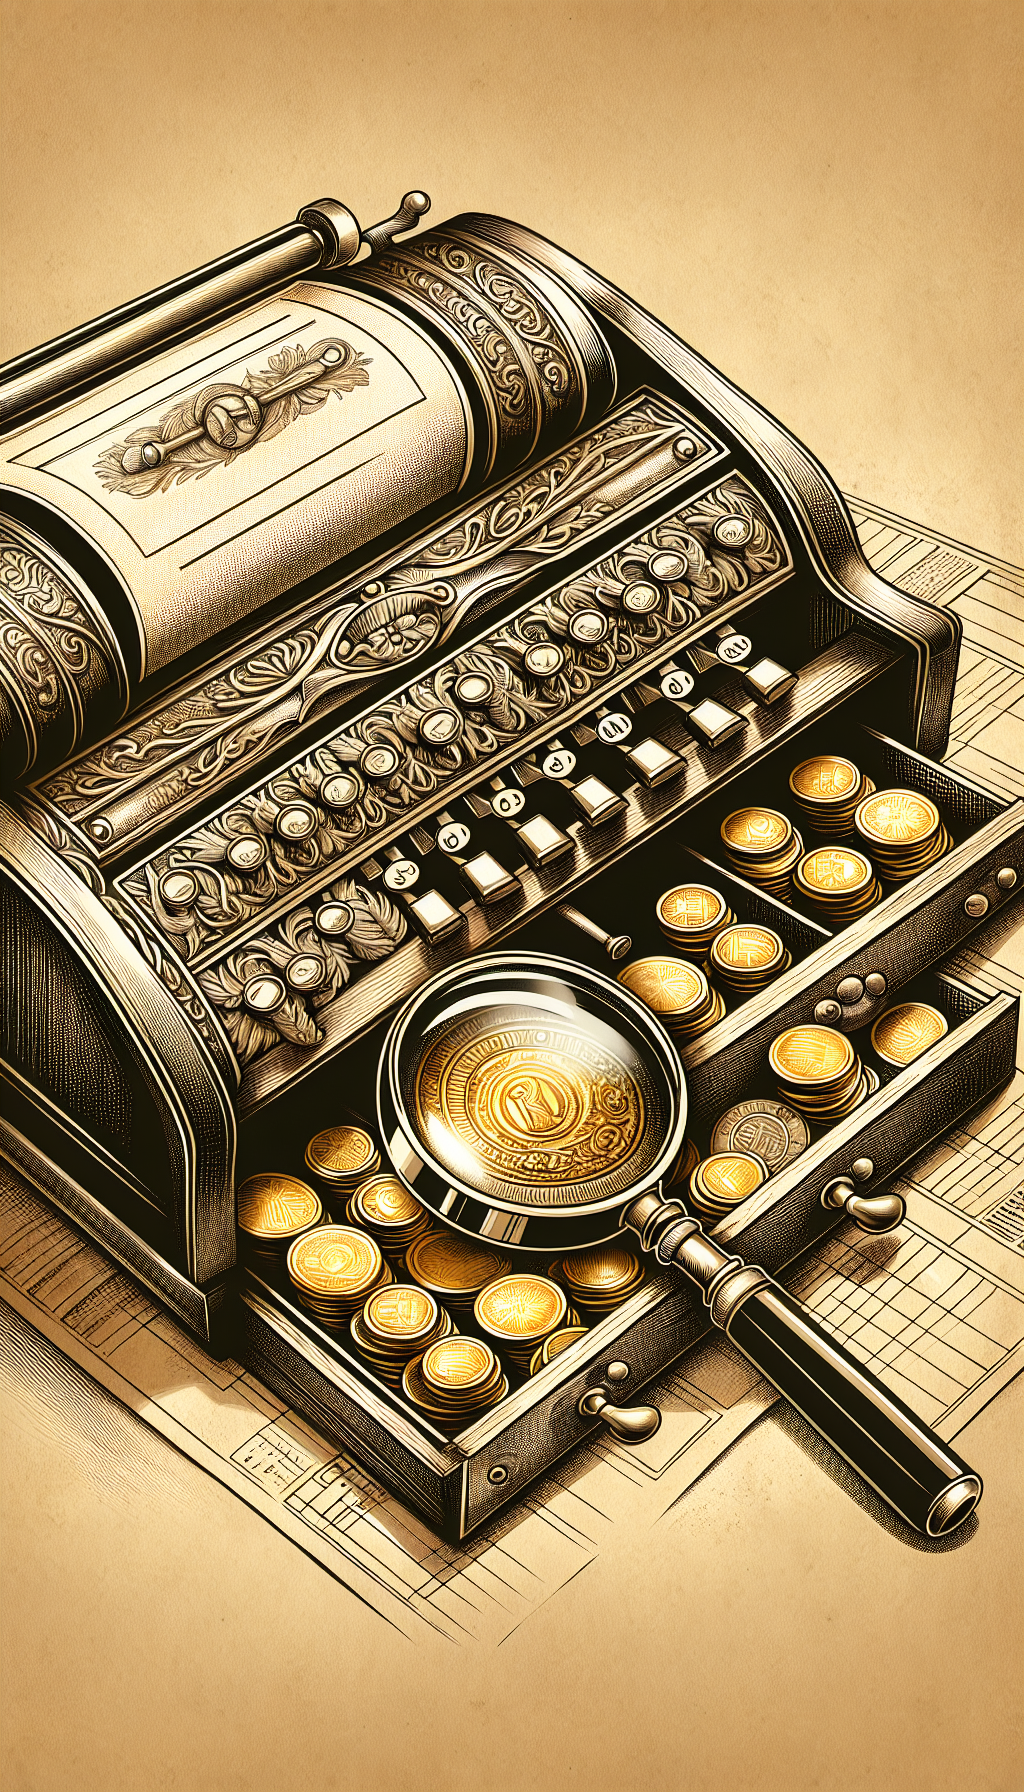 An illustrated antique cash register with intricate engravings sits atop a vintage appraisal document, magnifying glass hovering over. Its cash drawer is partially open, revealing glowing golden coins and a jeweler's loupe inspecting a hidden hallmark. The image is styled in sepia tones with crisp line art detailing, symbolizing the merging of historical value and expert evaluation.